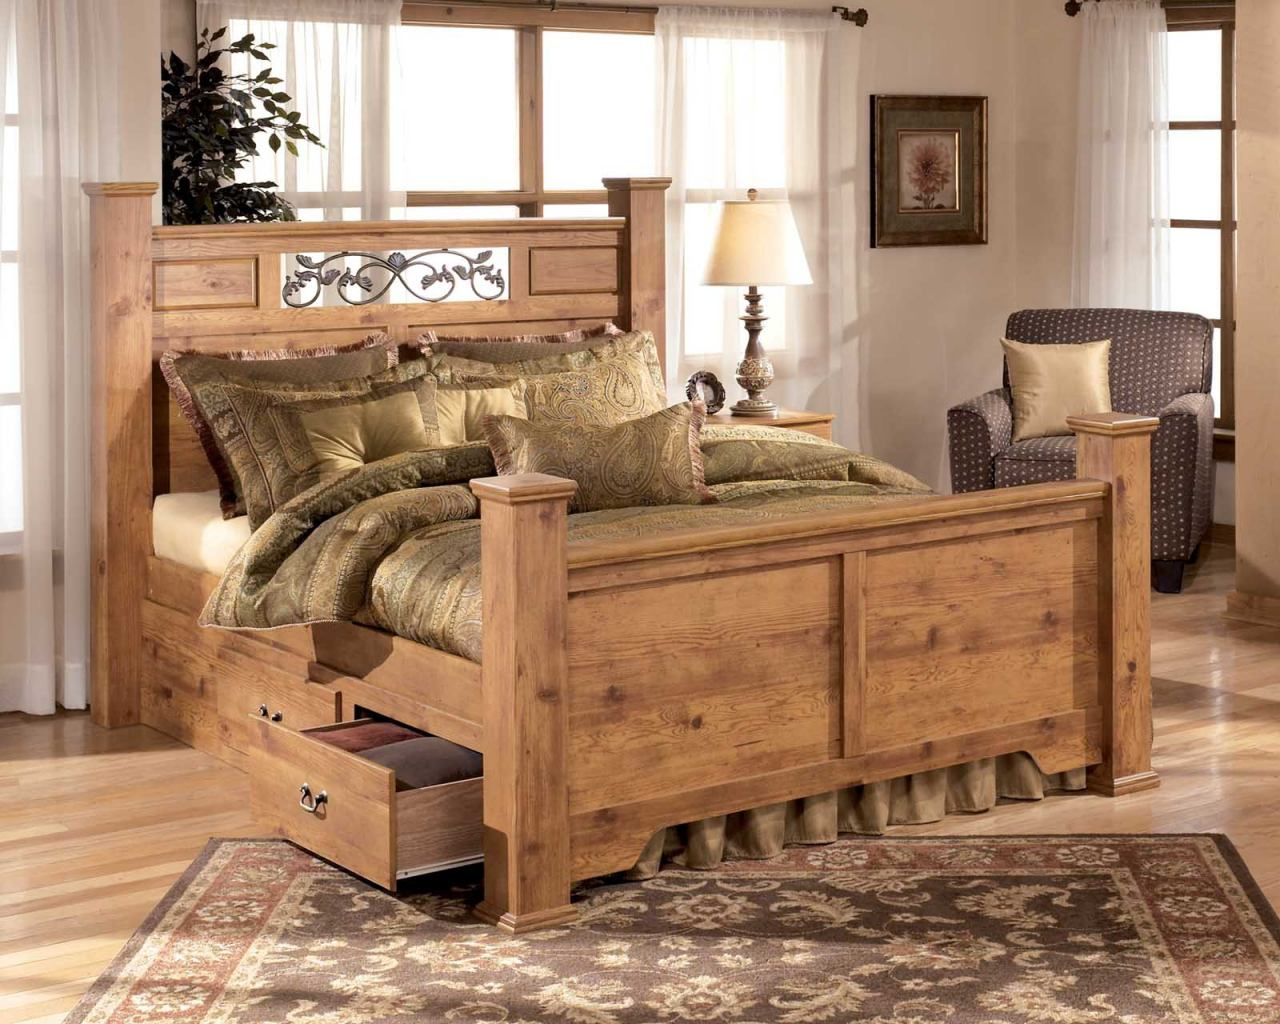 Bittersweet Poster Bedroom Set With Underbed Storage In Pine Grain with regard to size 1280 X 1024